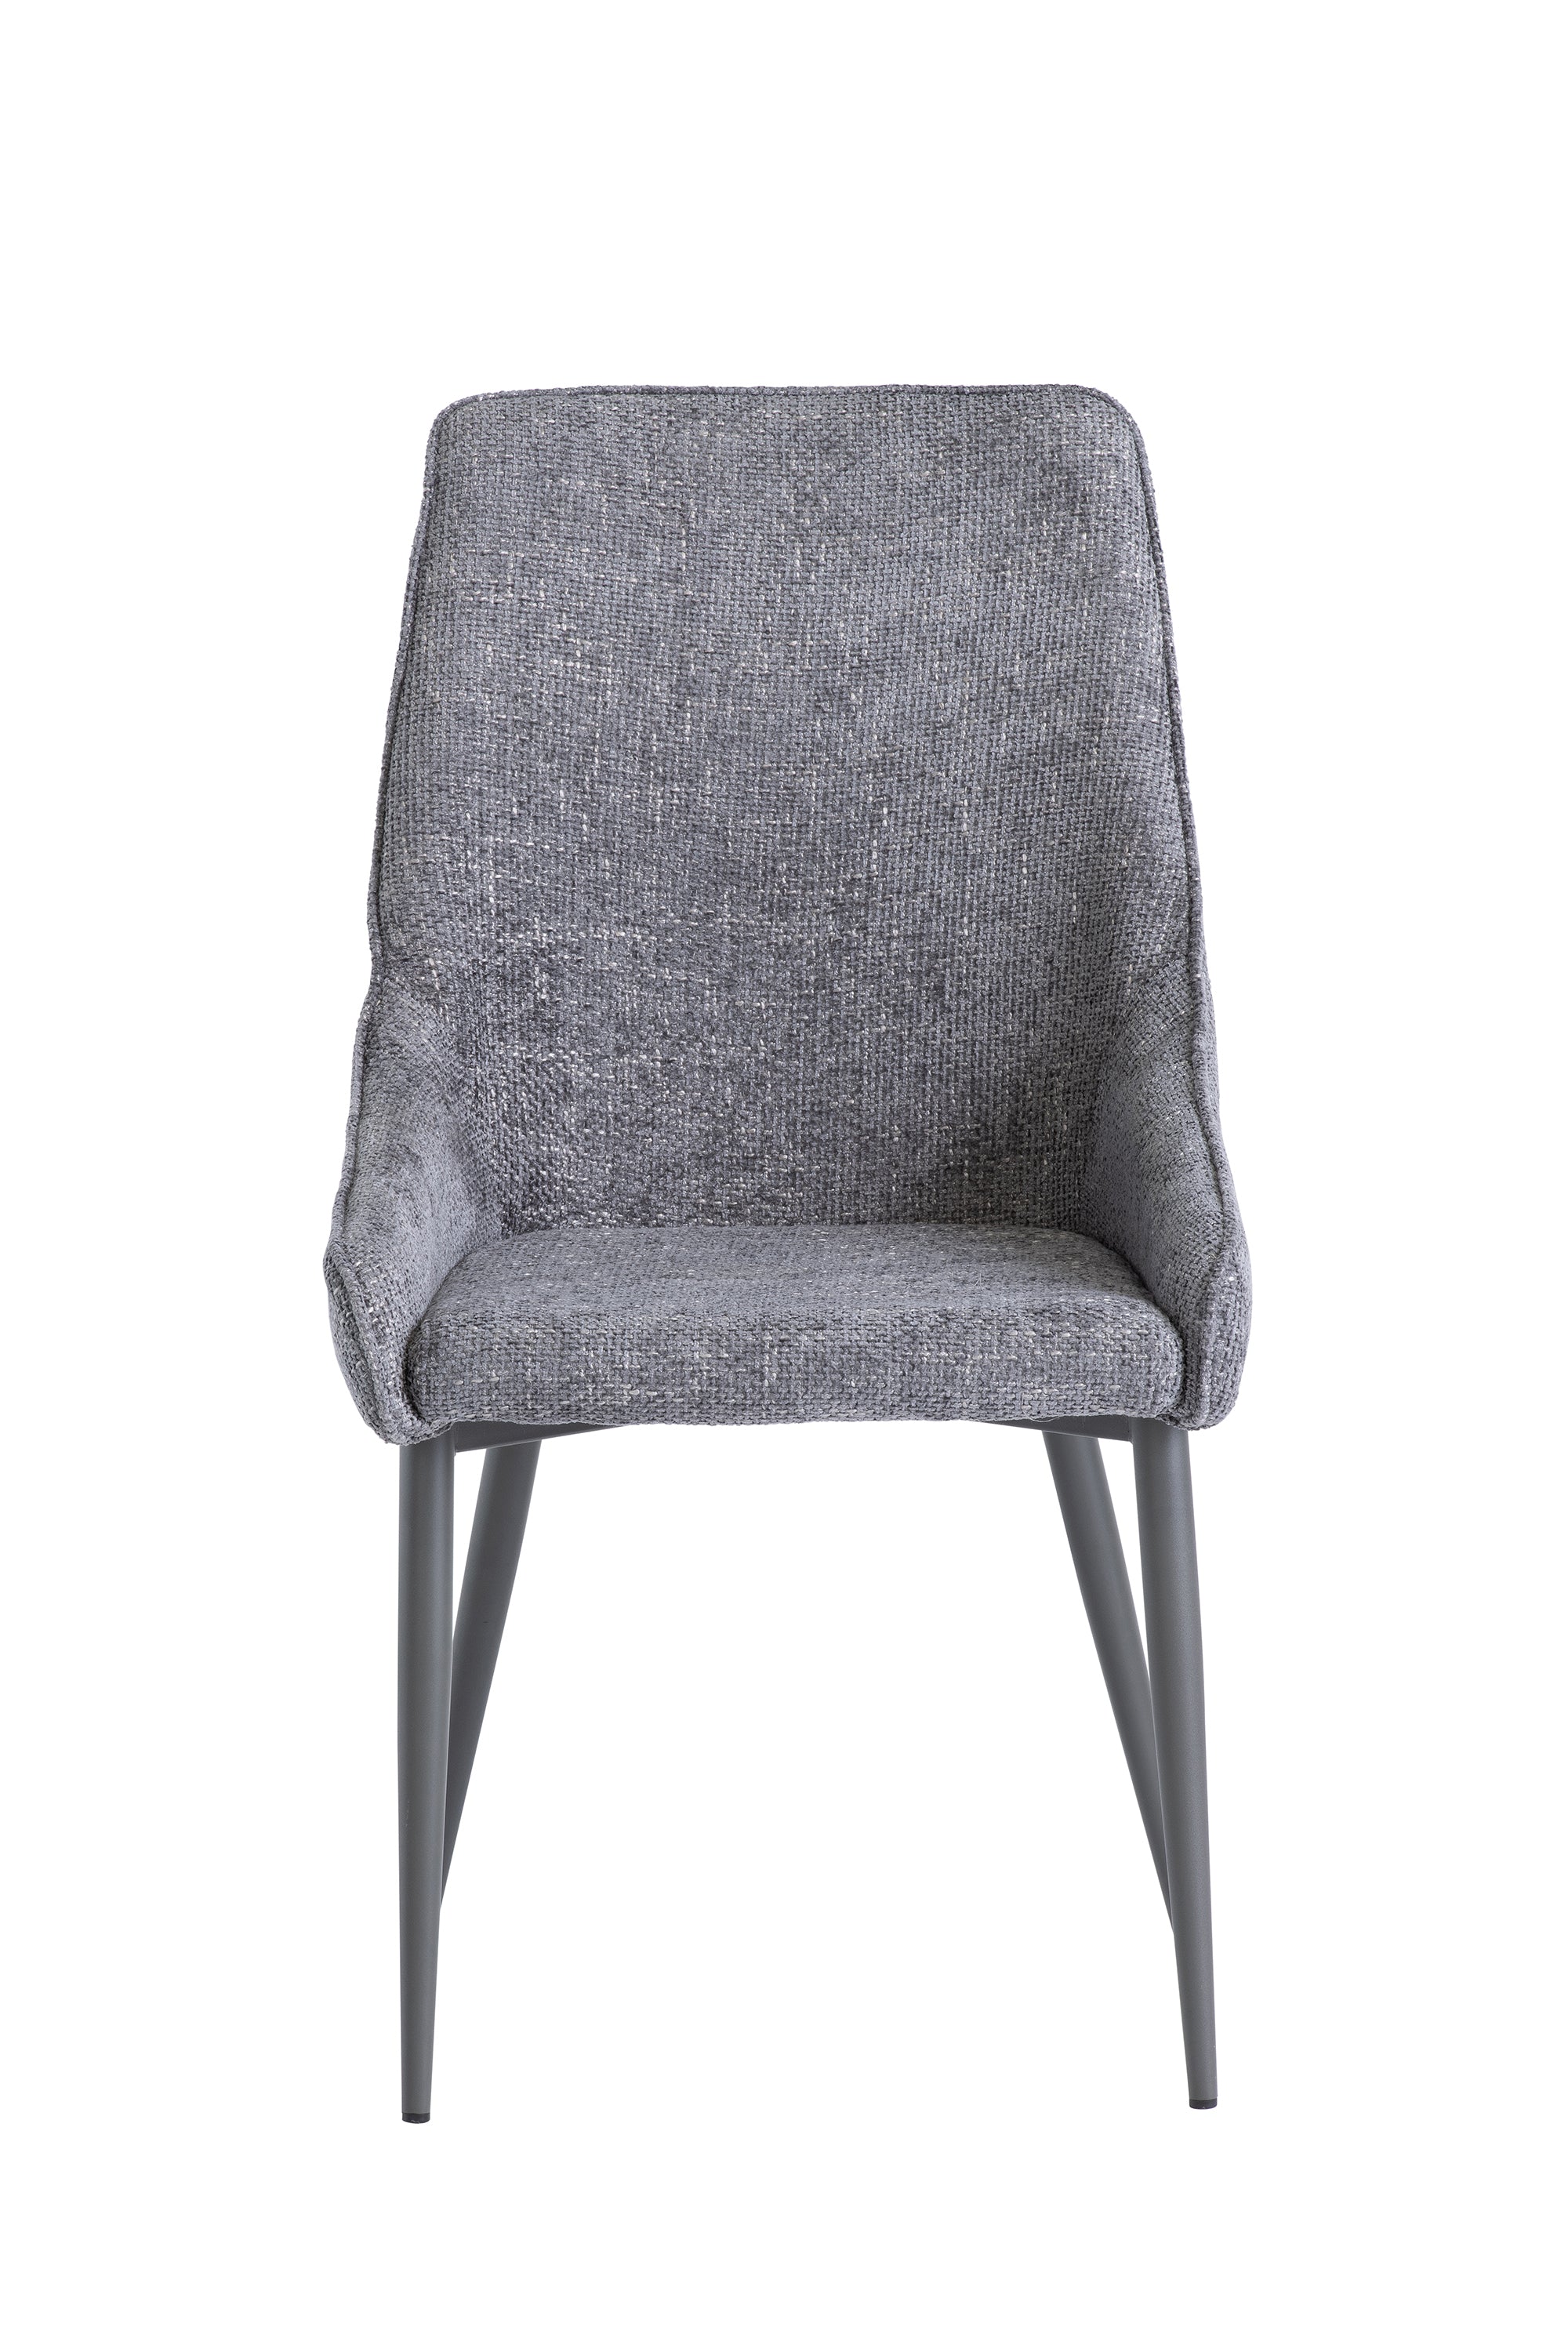 Jemma Textured Fabric Dining Chair (Pairs)